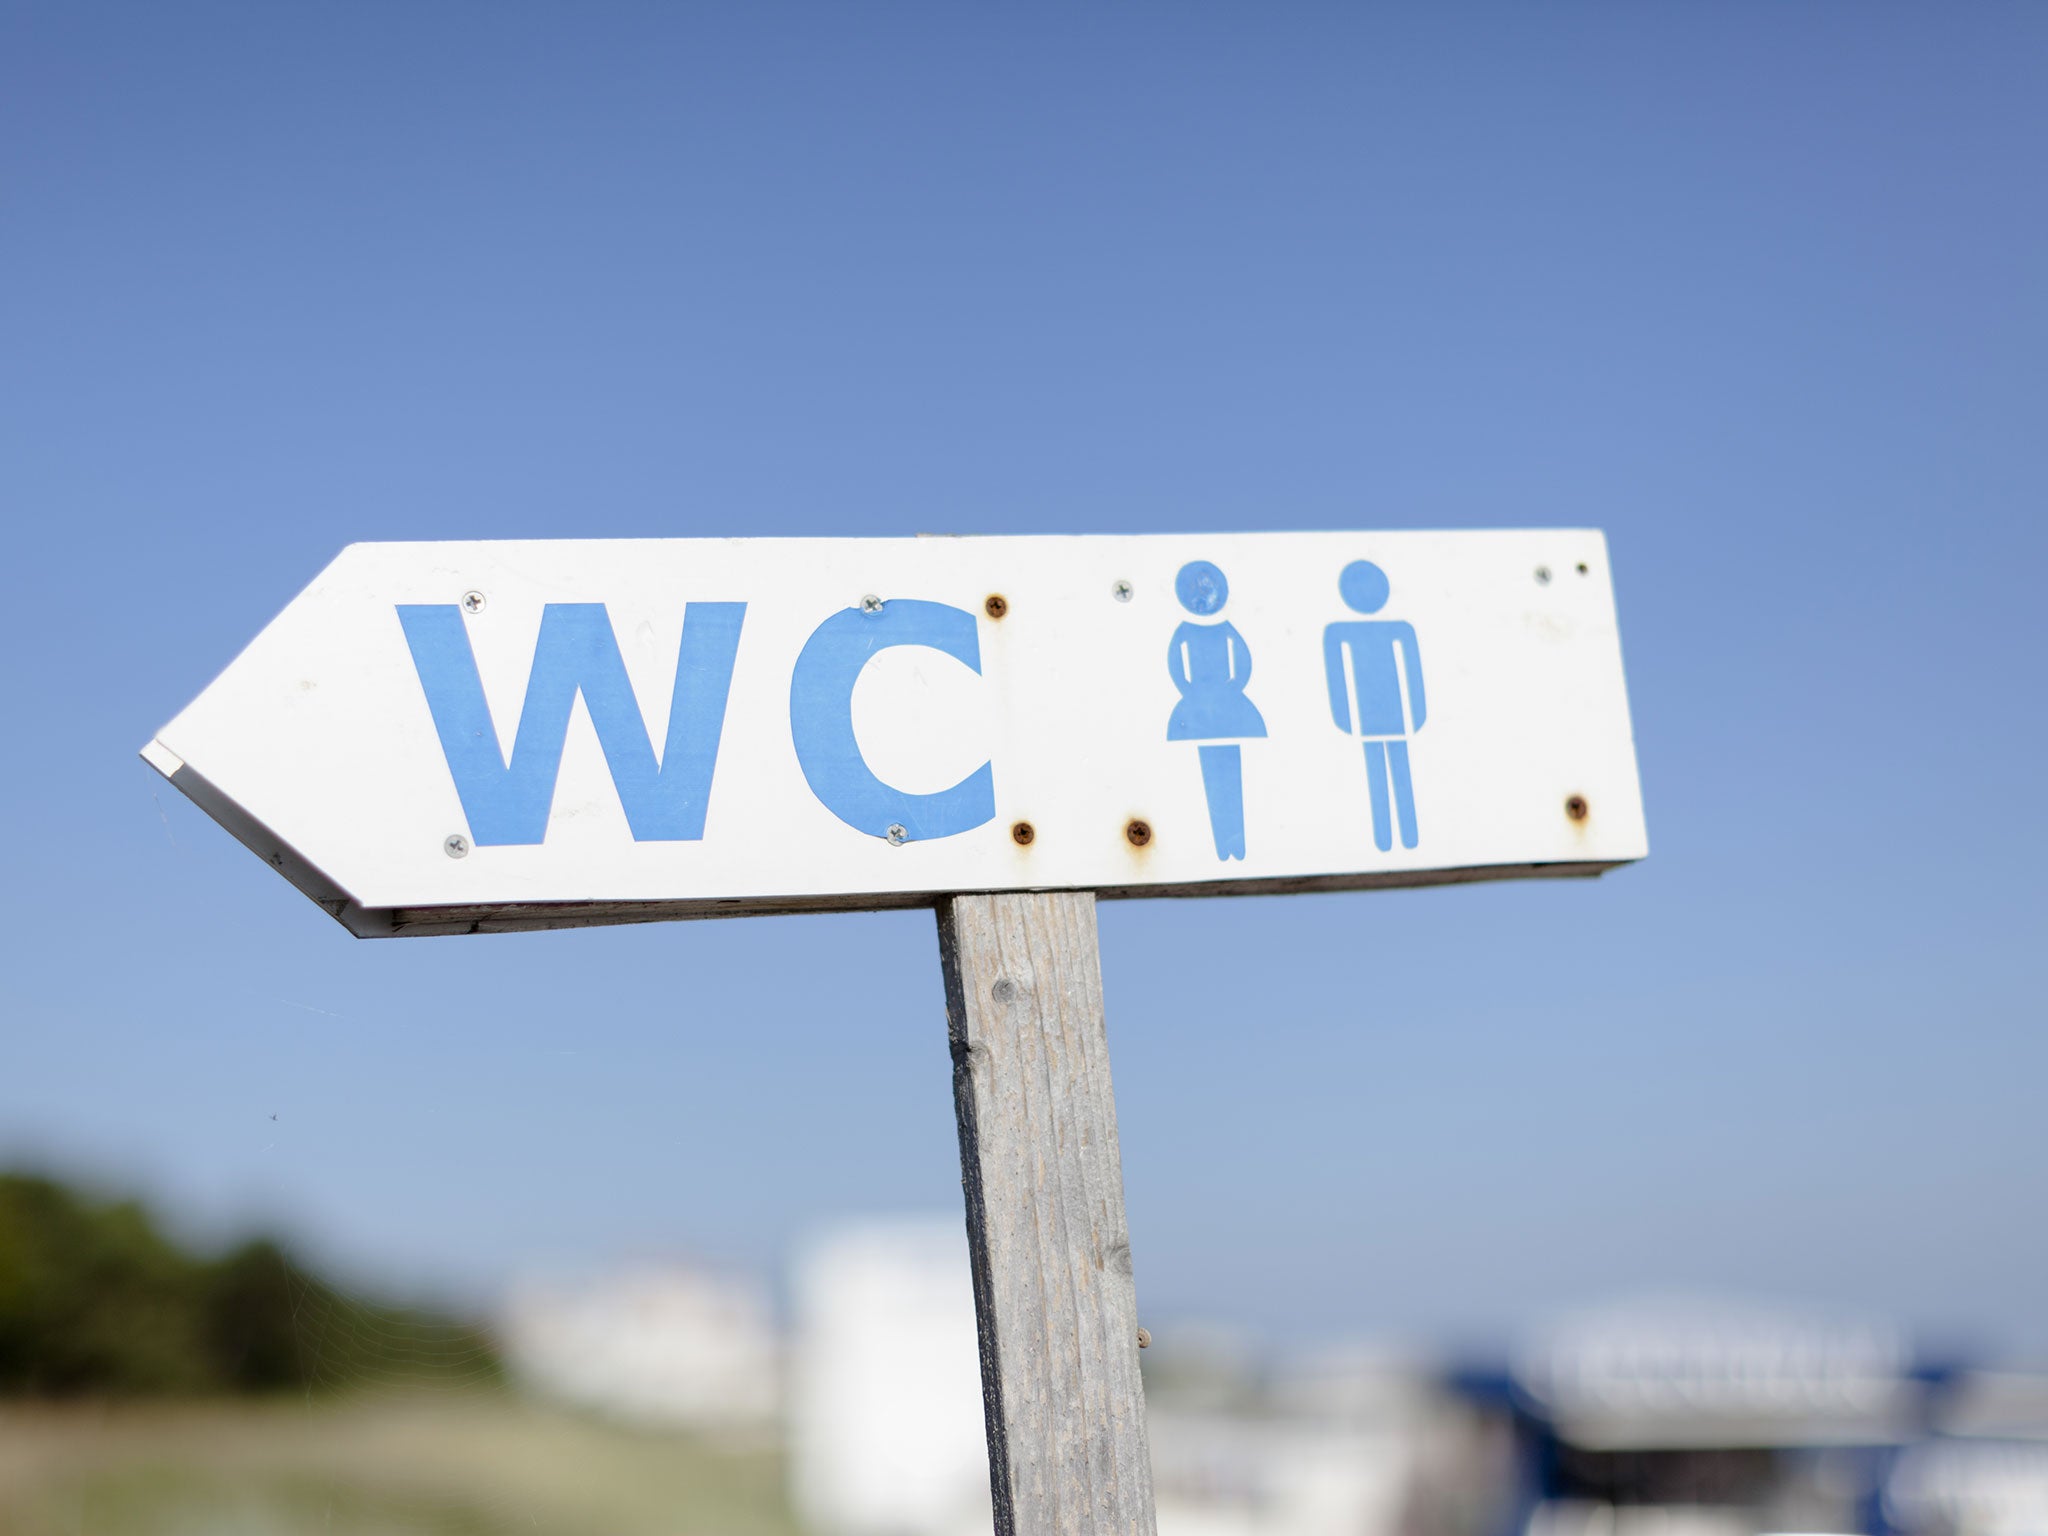 Bill 1014 would force people to use a bathroom depending on their gender at birth